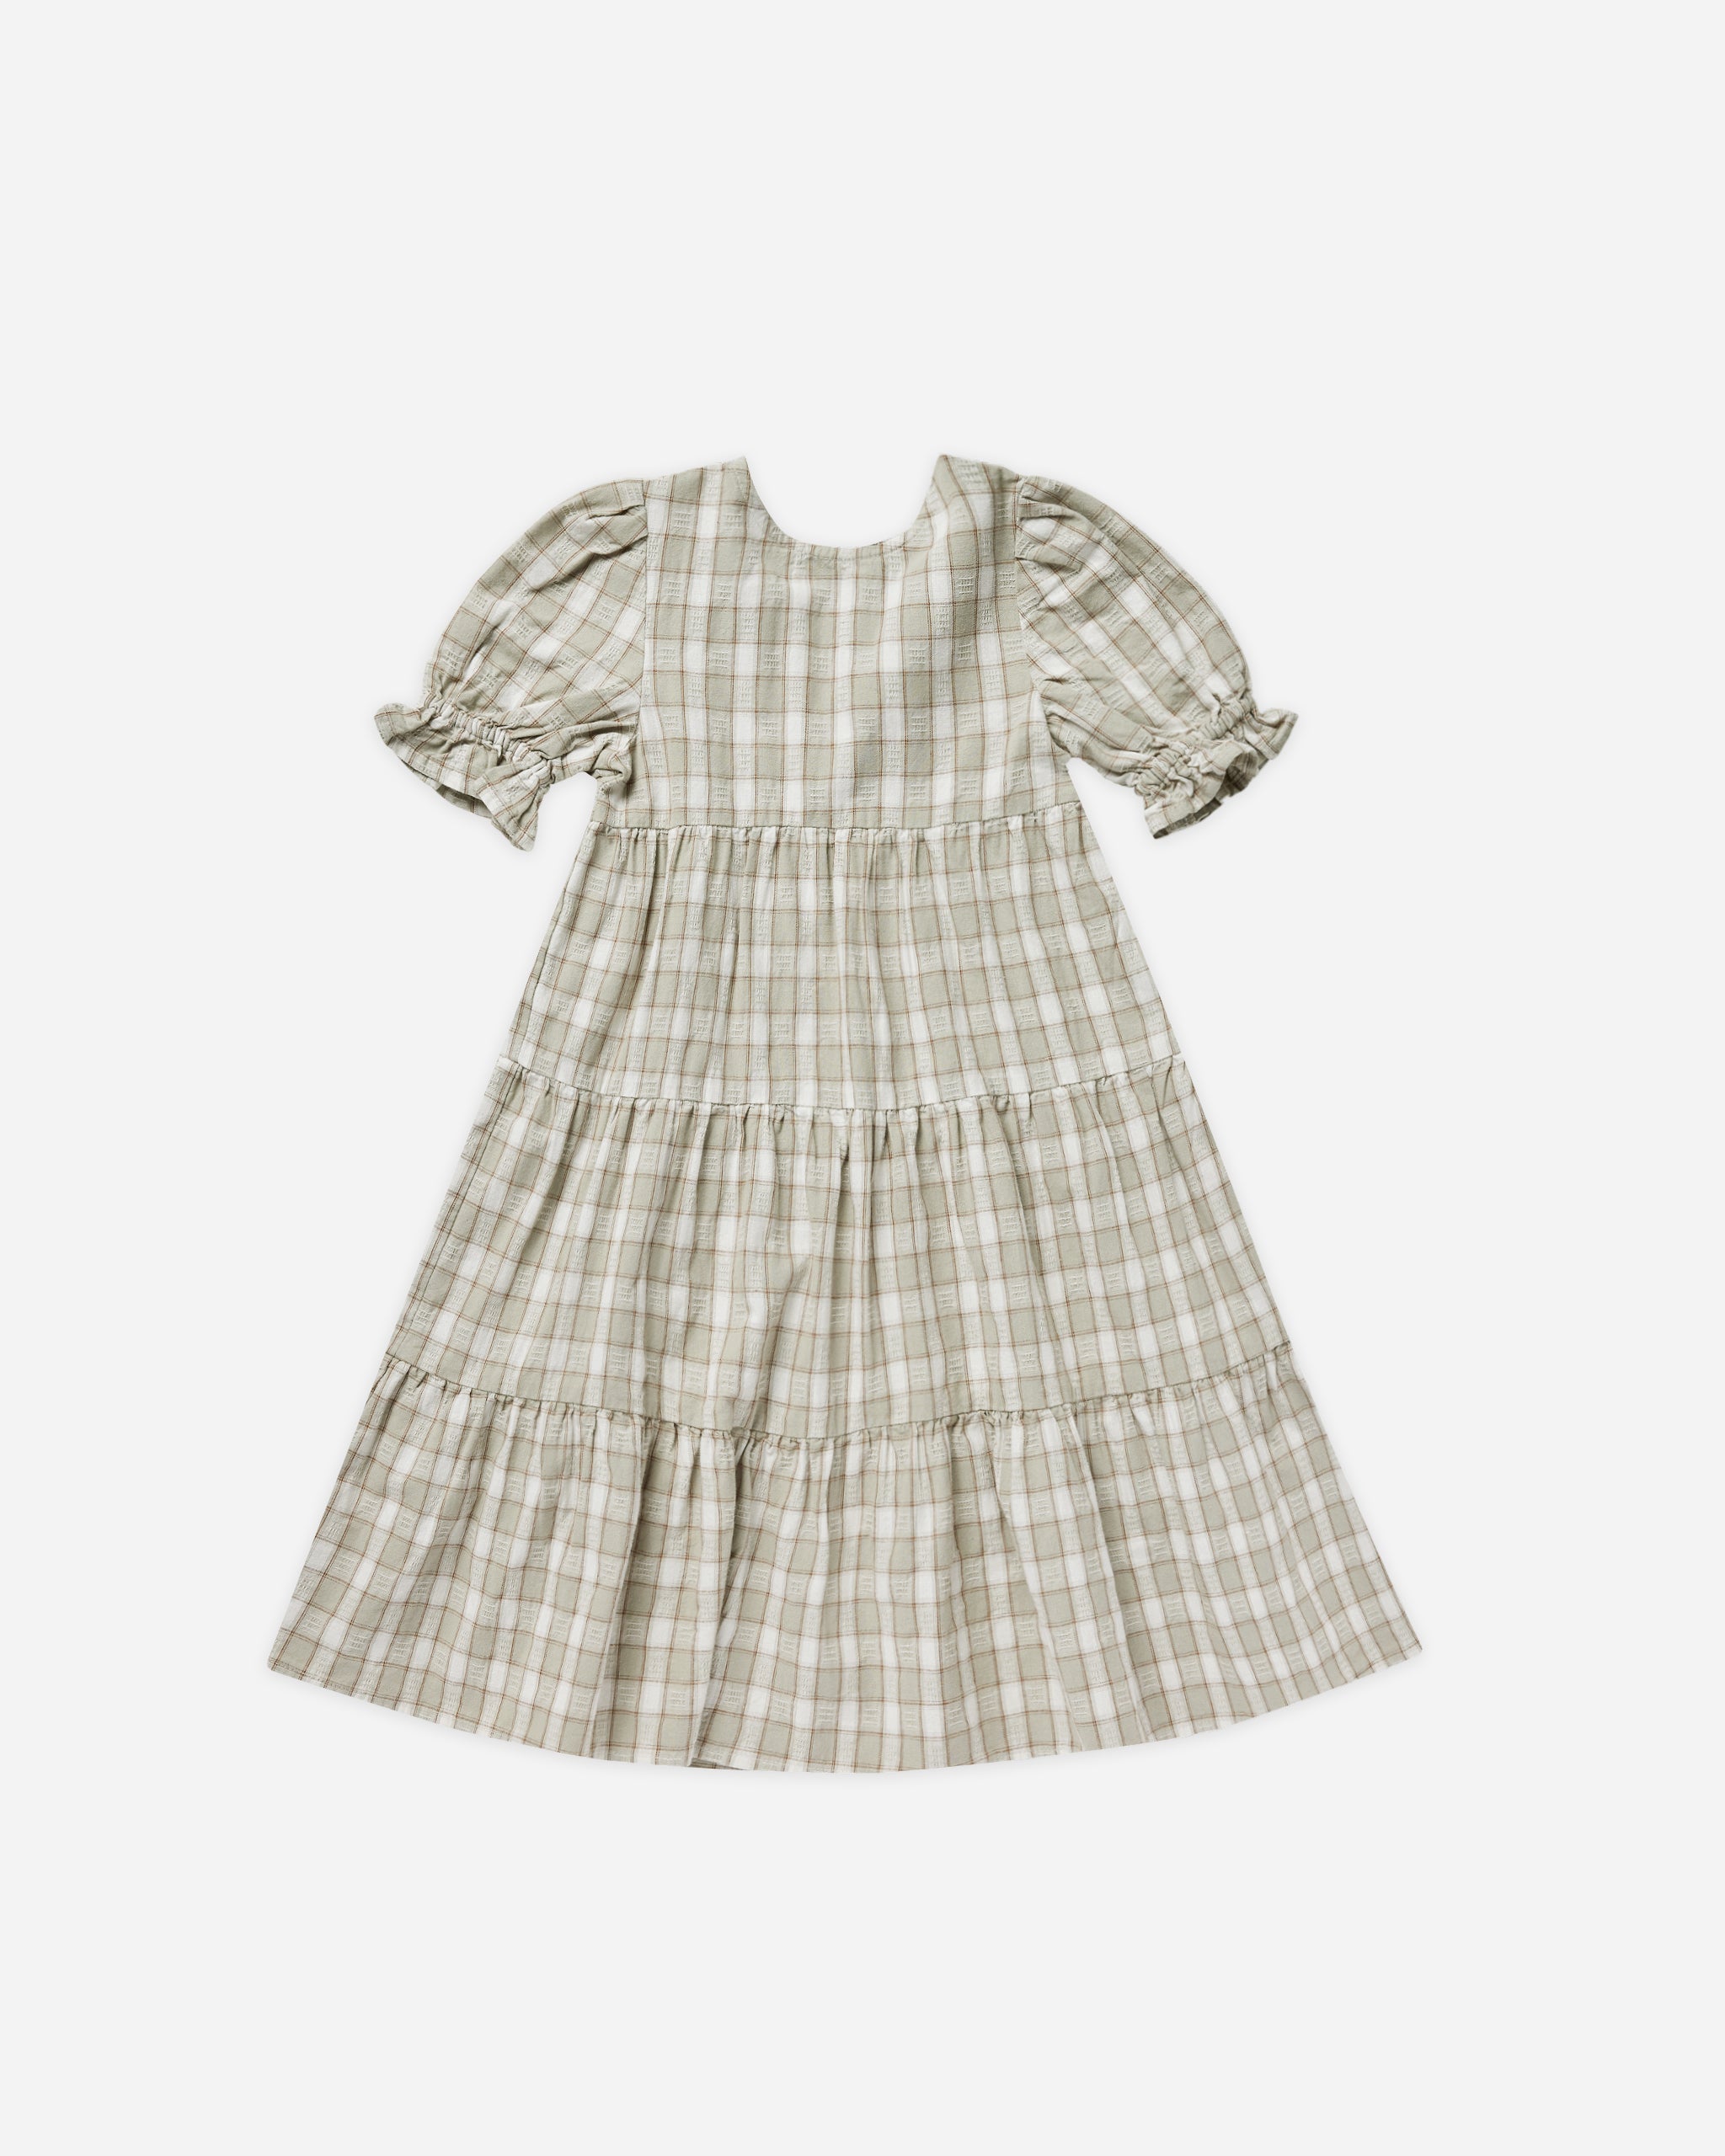 Frannie Dress || Pewter Plaid - Rylee + Cru | Kids Clothes | Trendy Baby Clothes | Modern Infant Outfits |